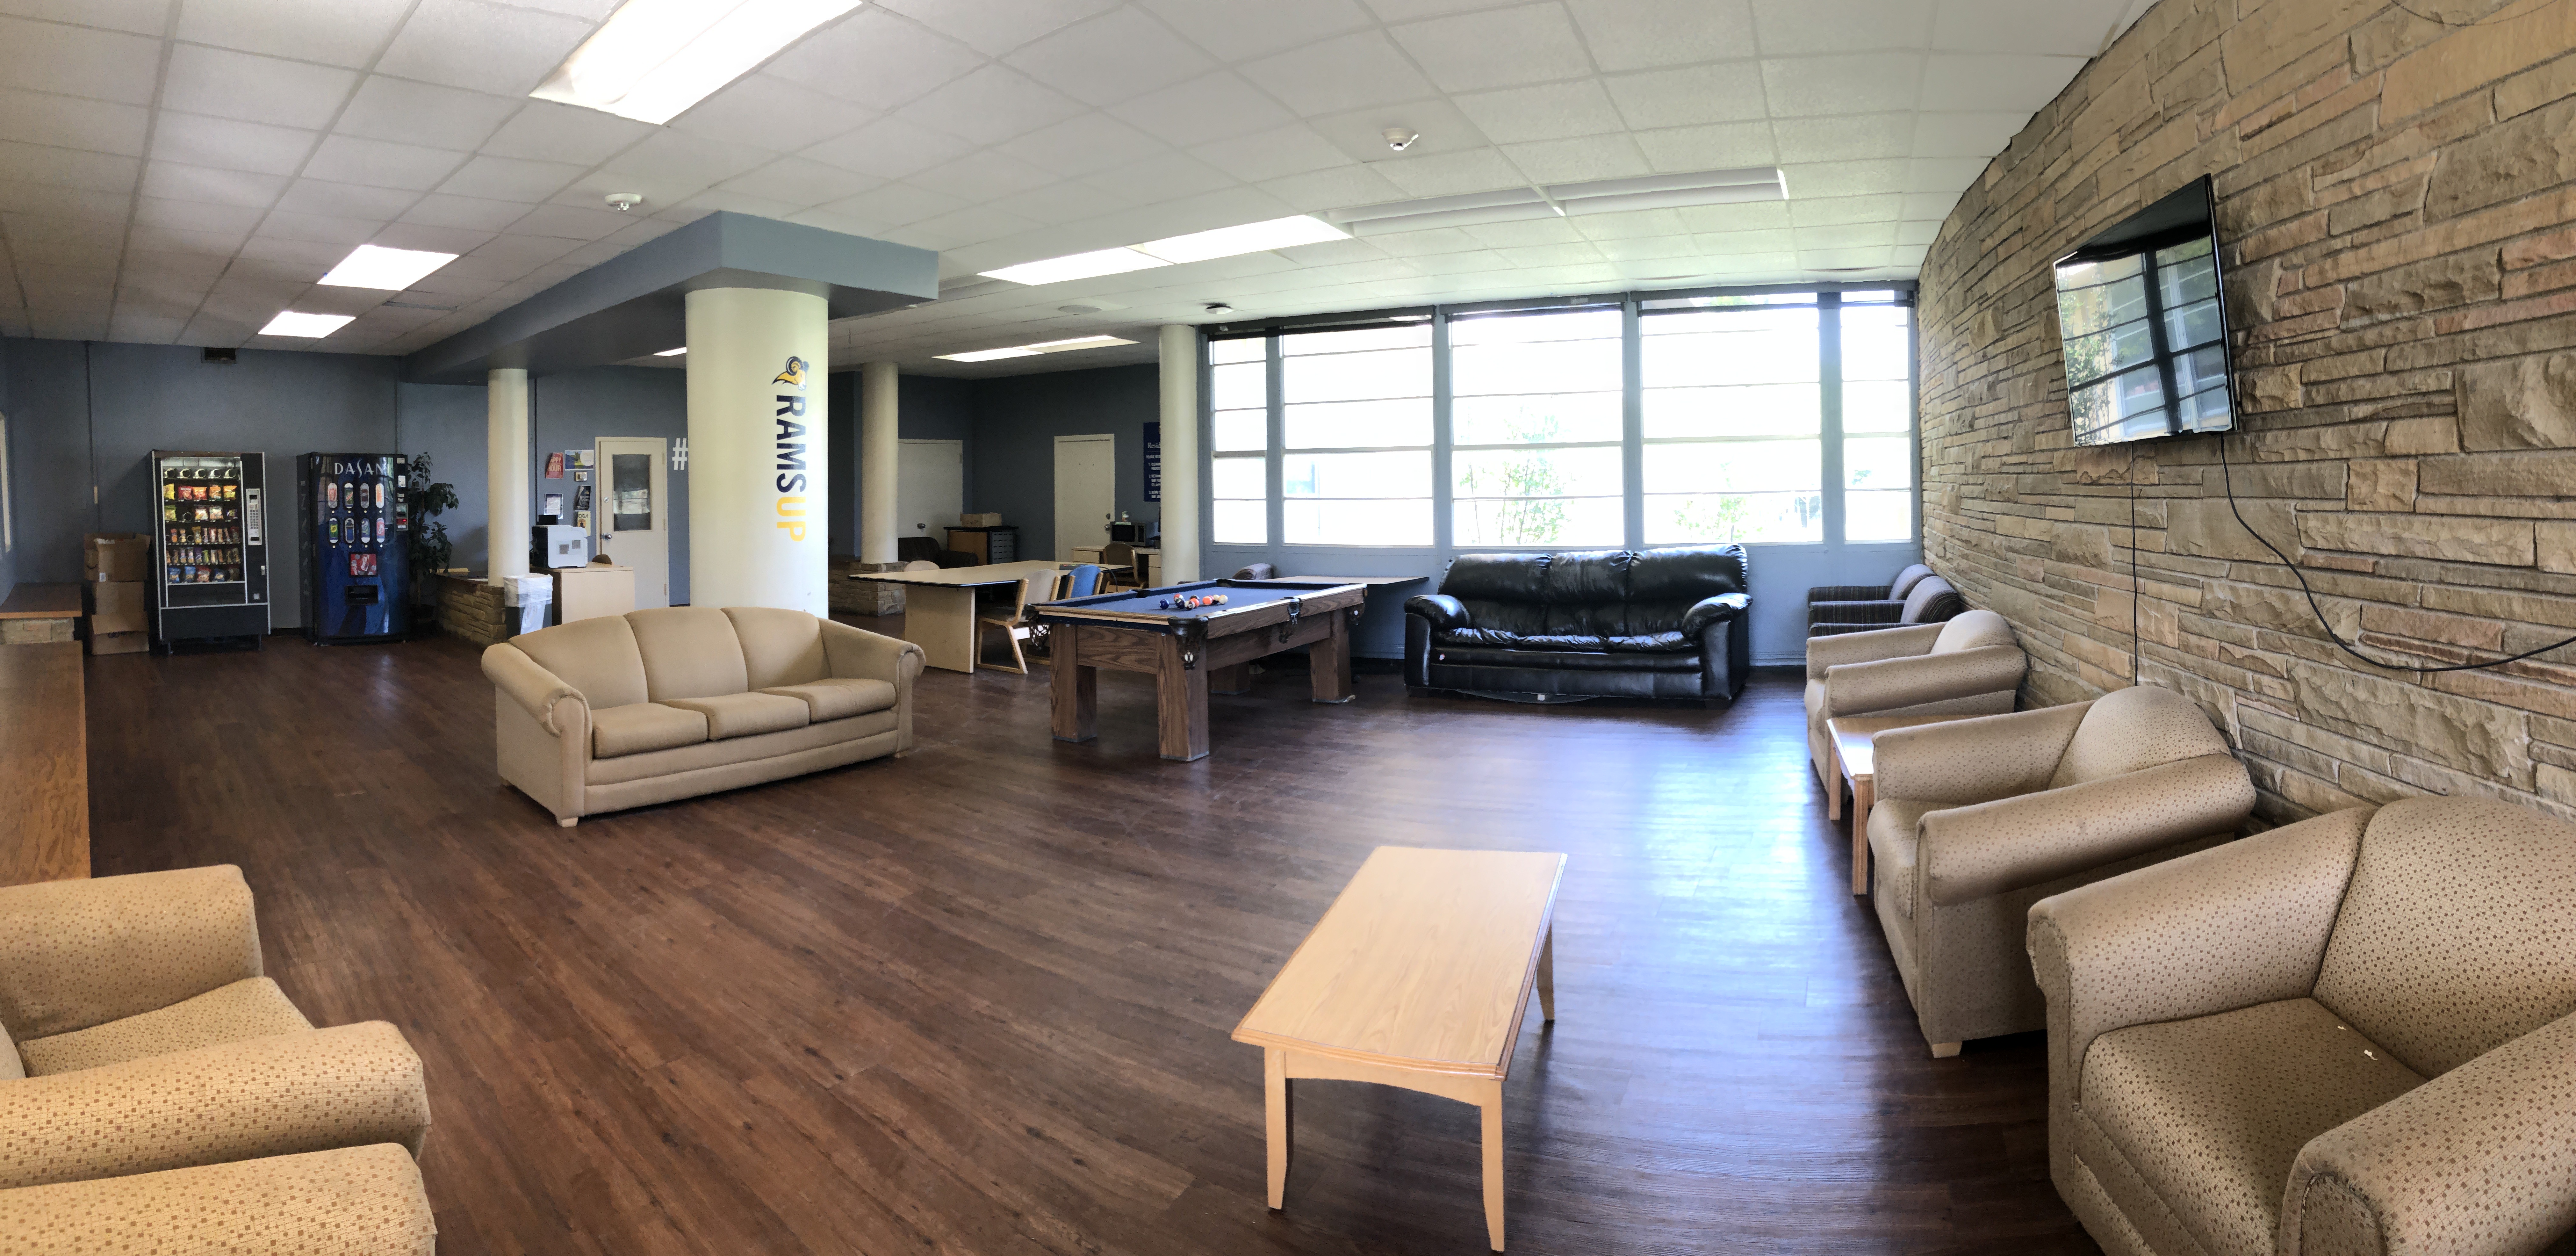 Residence hall lobby with couches, pool table, tables and vending machines